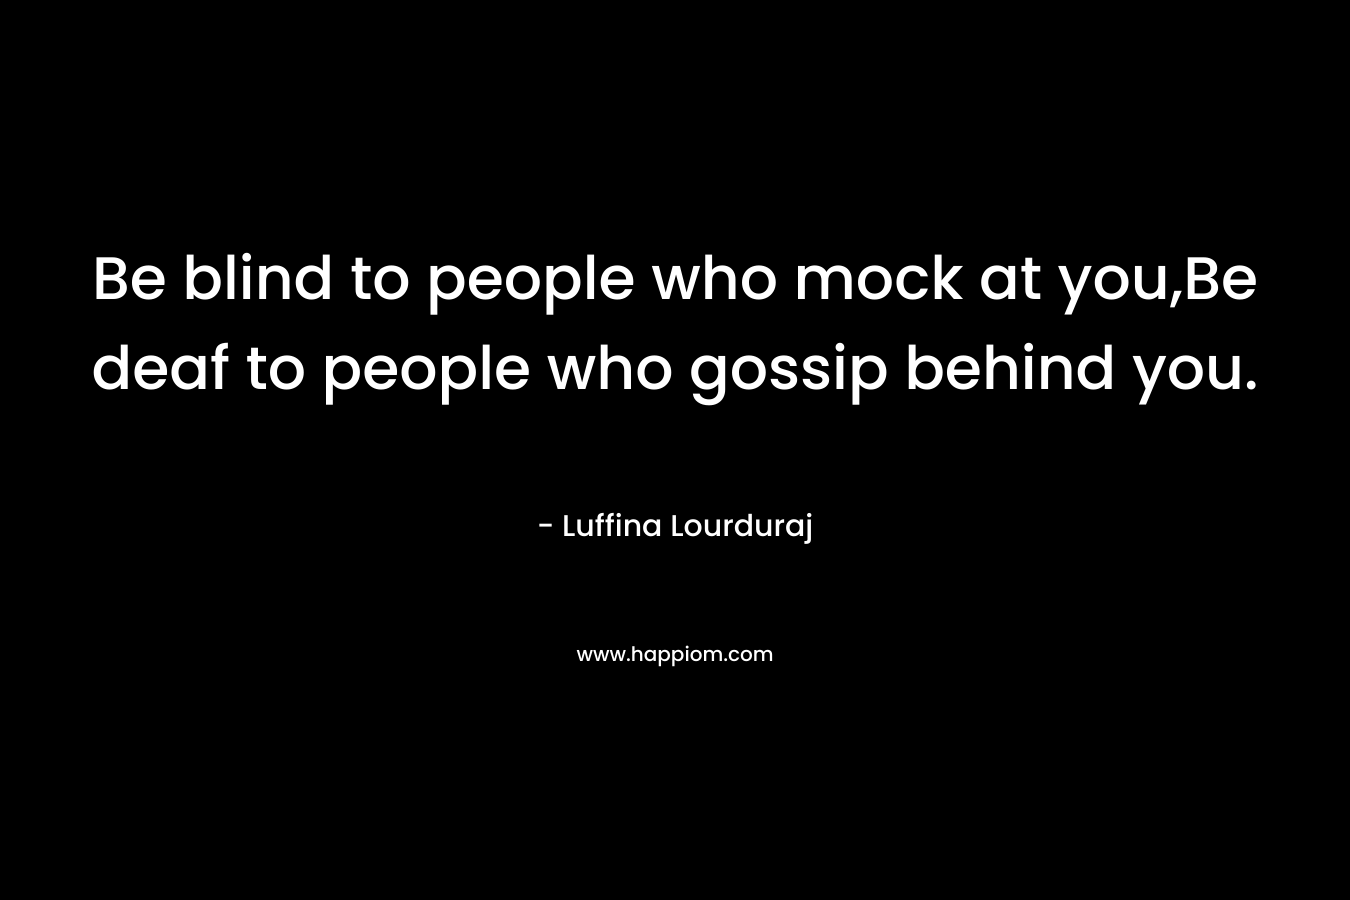 Be blind to people who mock at you,Be deaf to people who gossip behind you.